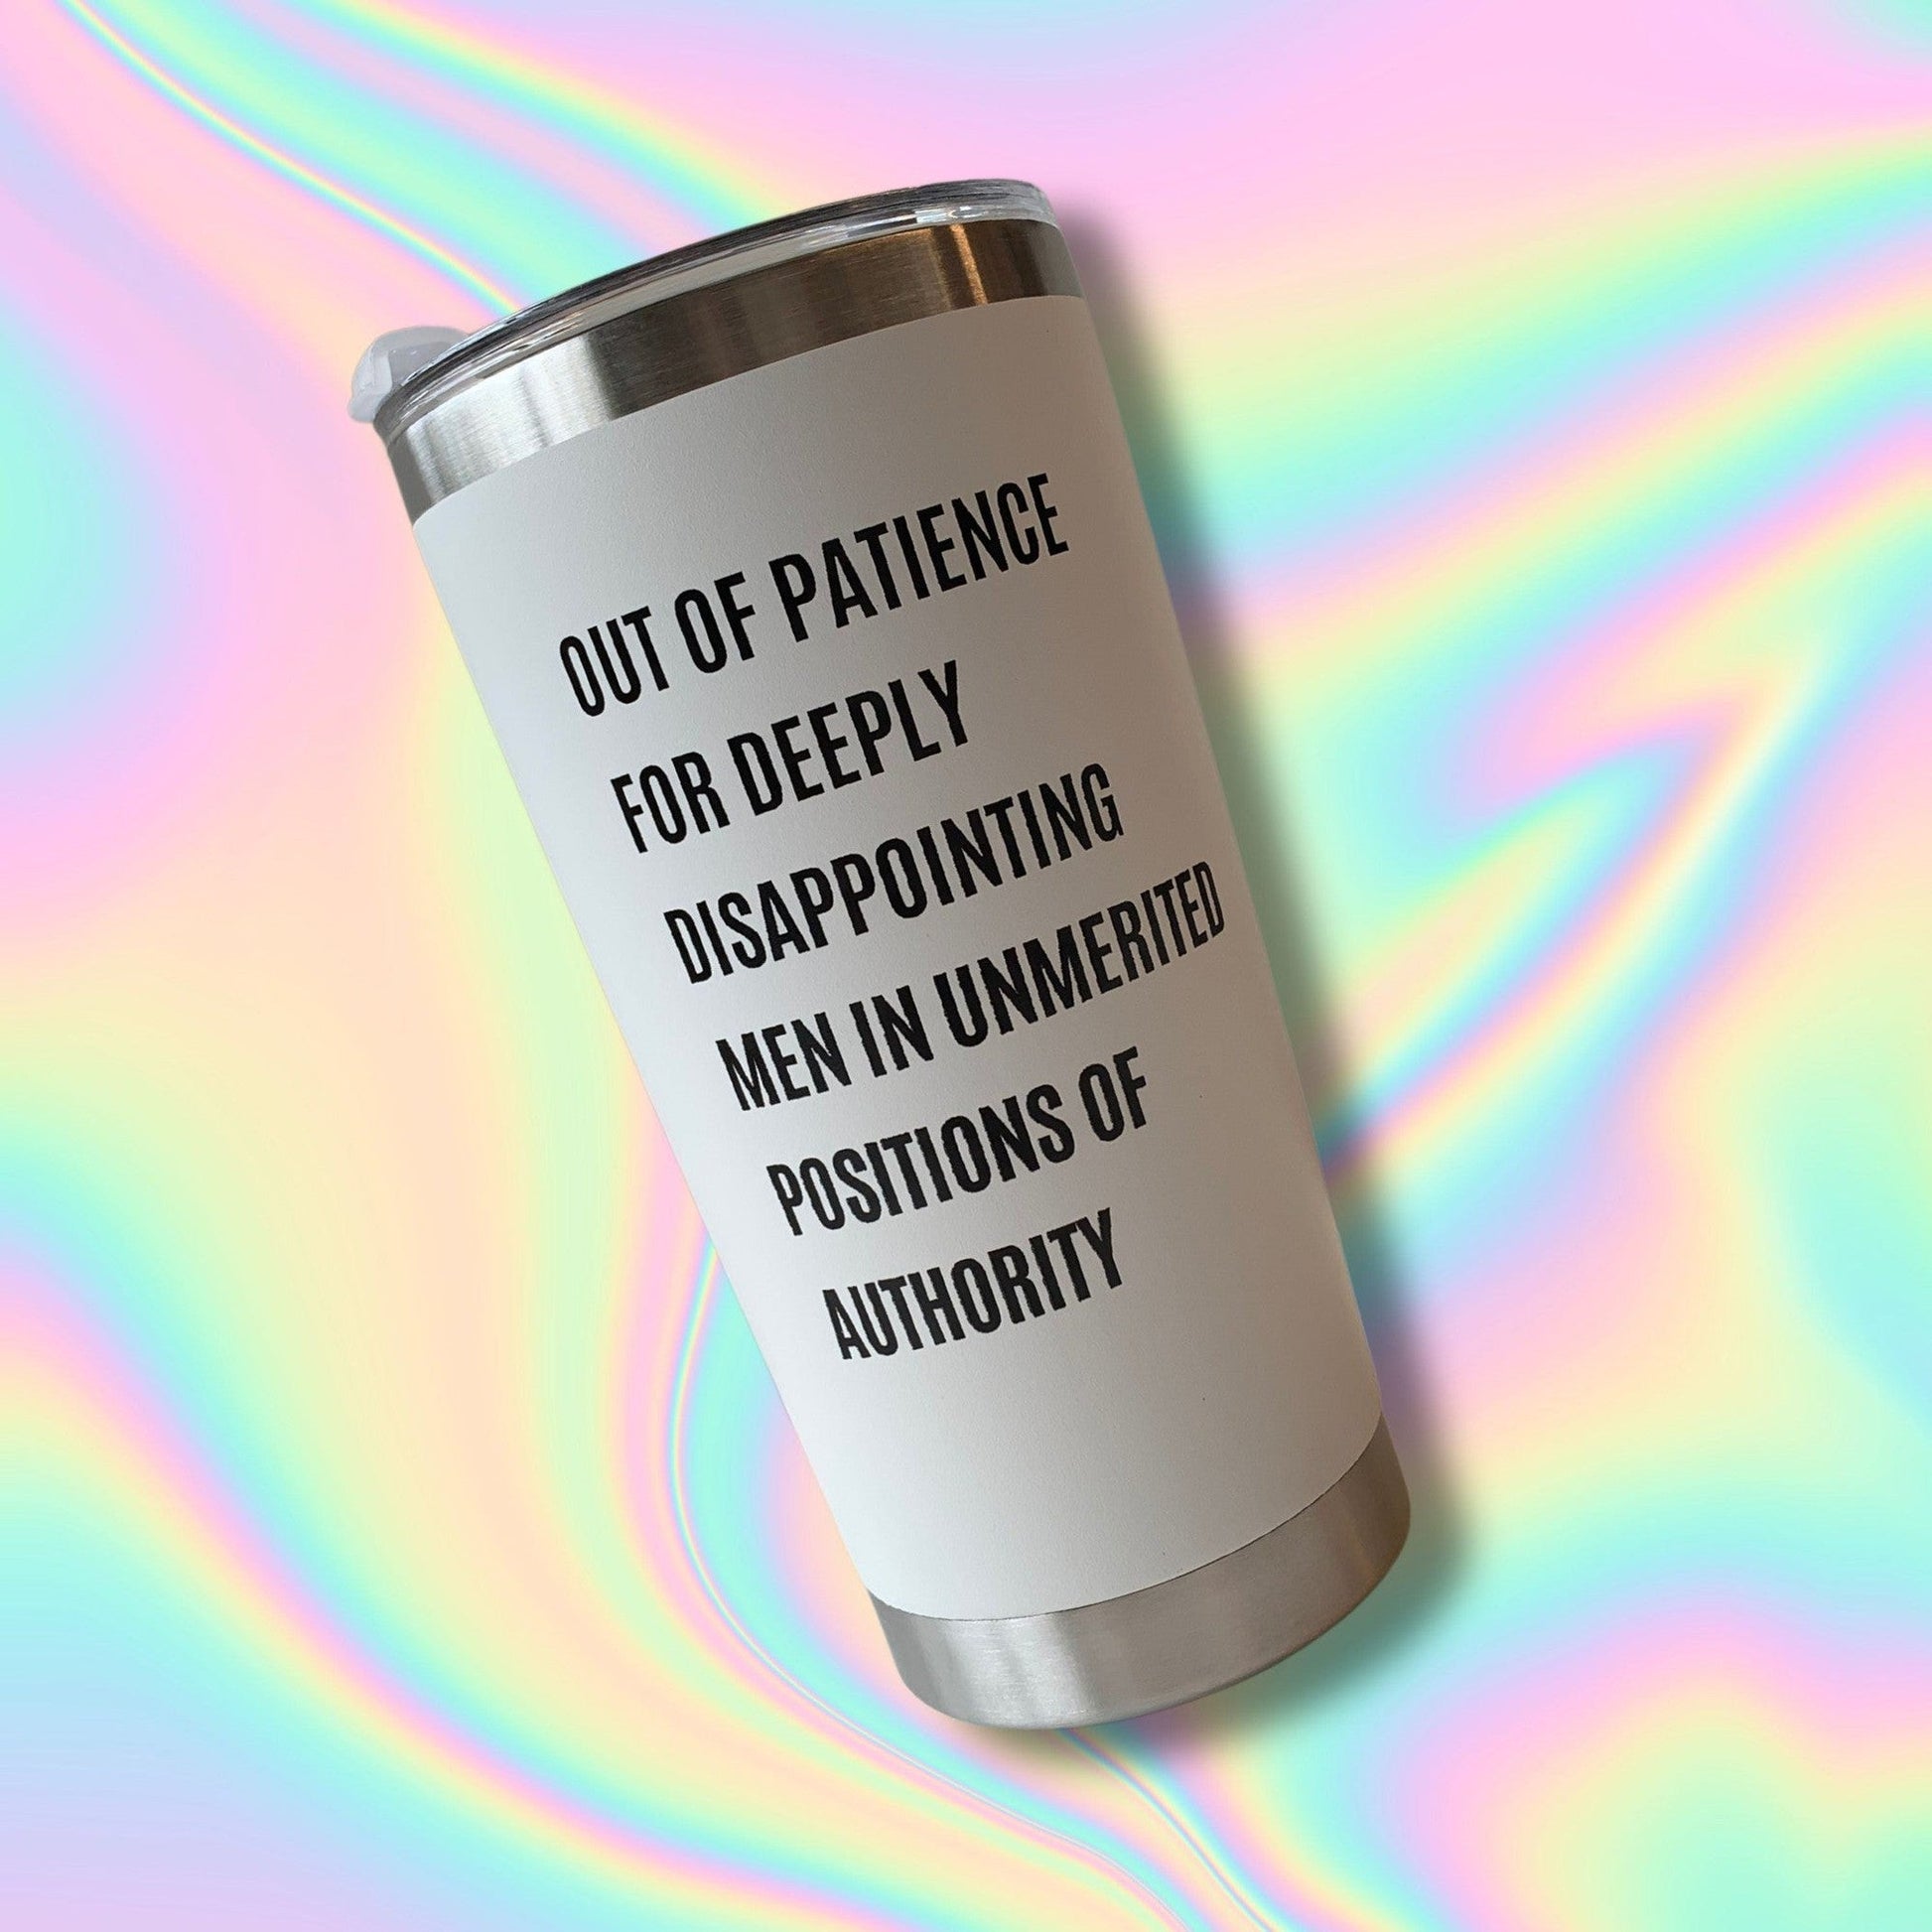 Out of Patience for Deeply Disappointing Men in Unmerited Positions of Authority Feminist Travel Mug in White